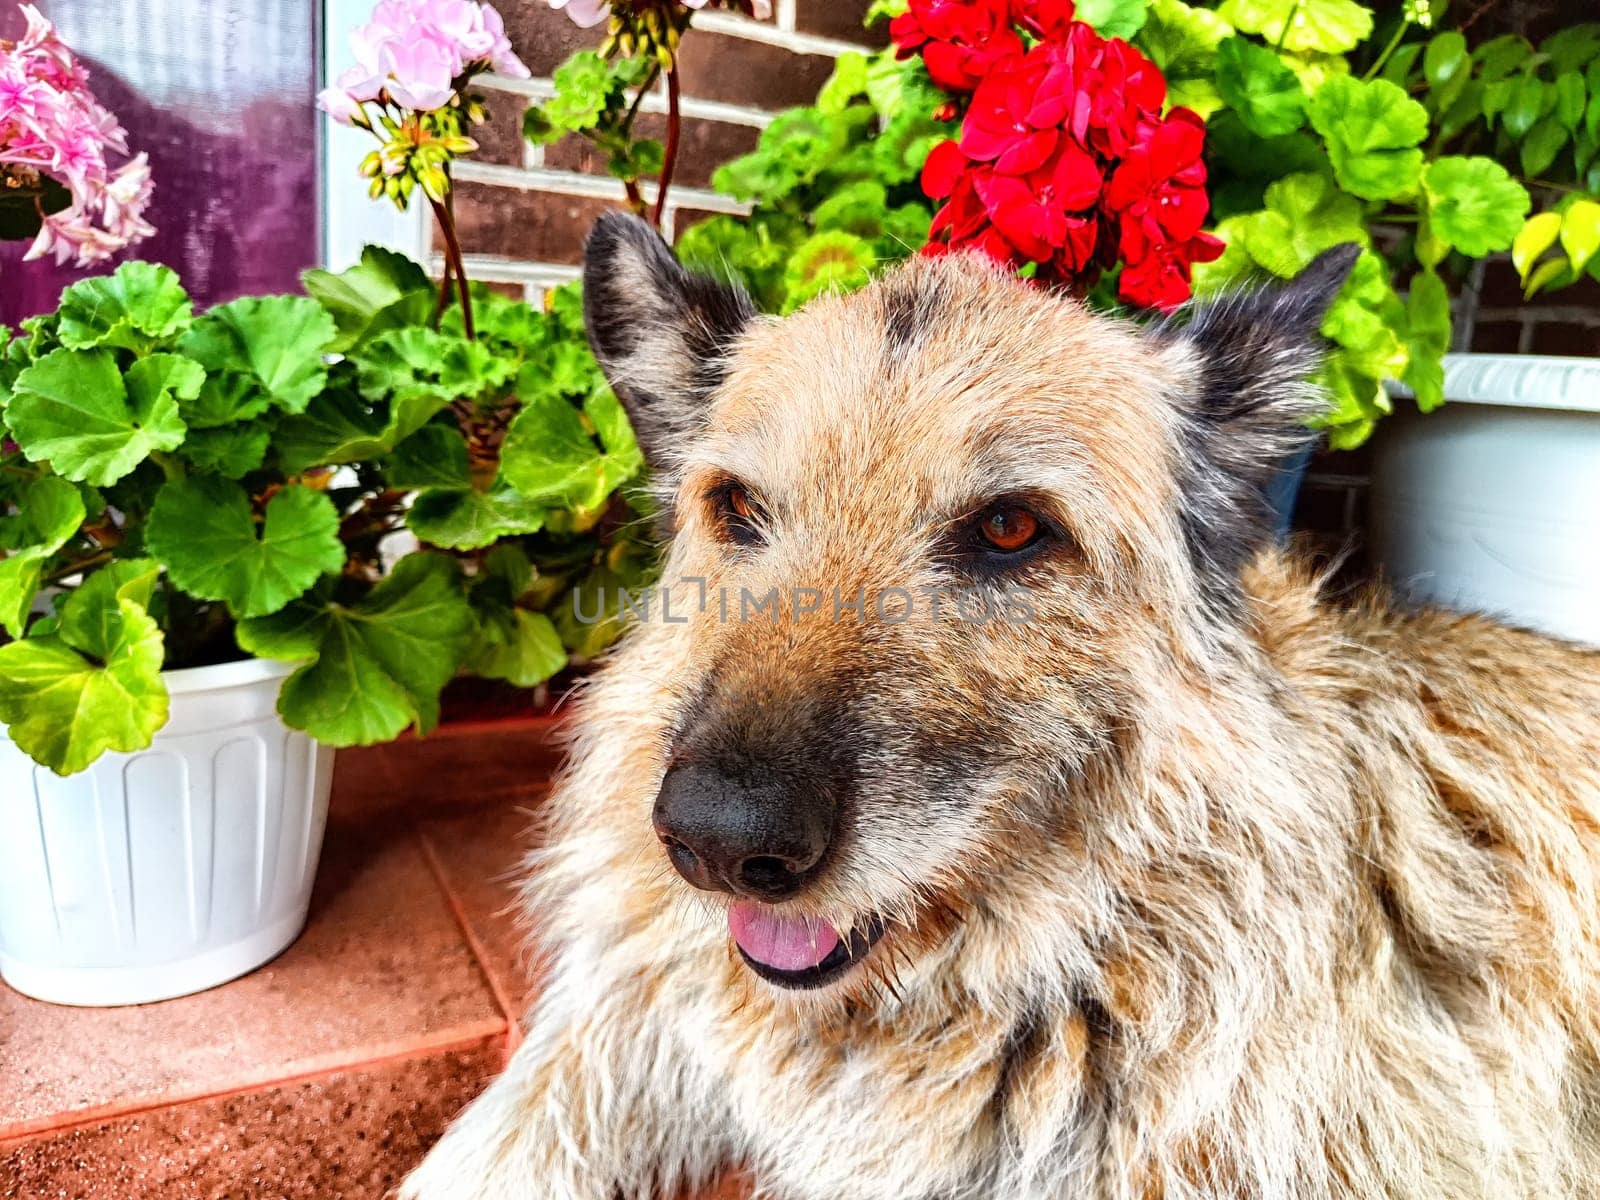 Alert Mixed-Breed Dog Sitting on Patio Surrounded by Potted Plants by keleny